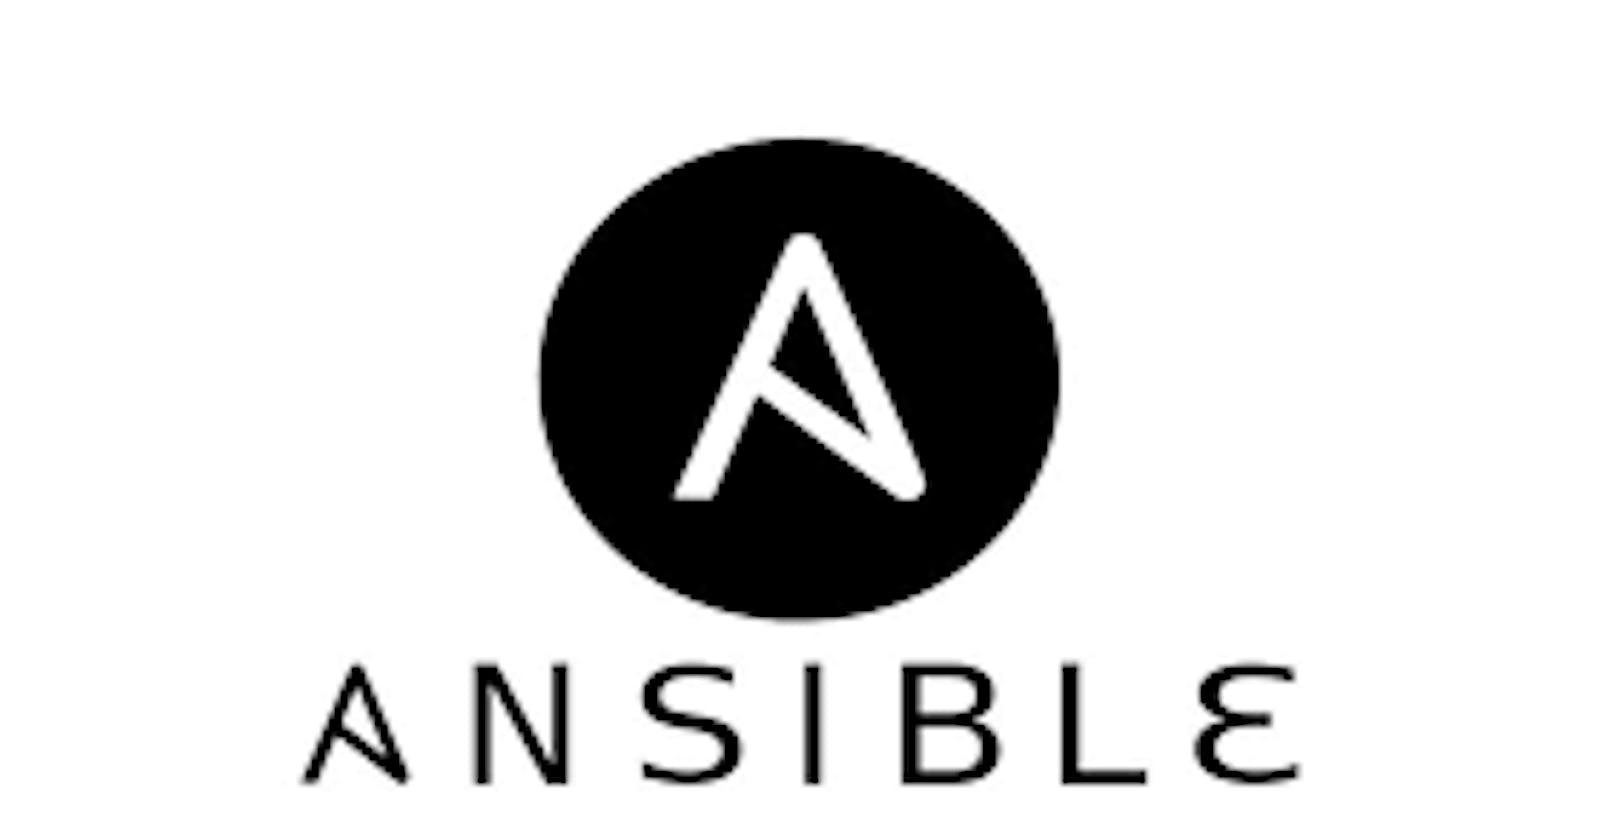 Day 59: Ansible Project 🔥